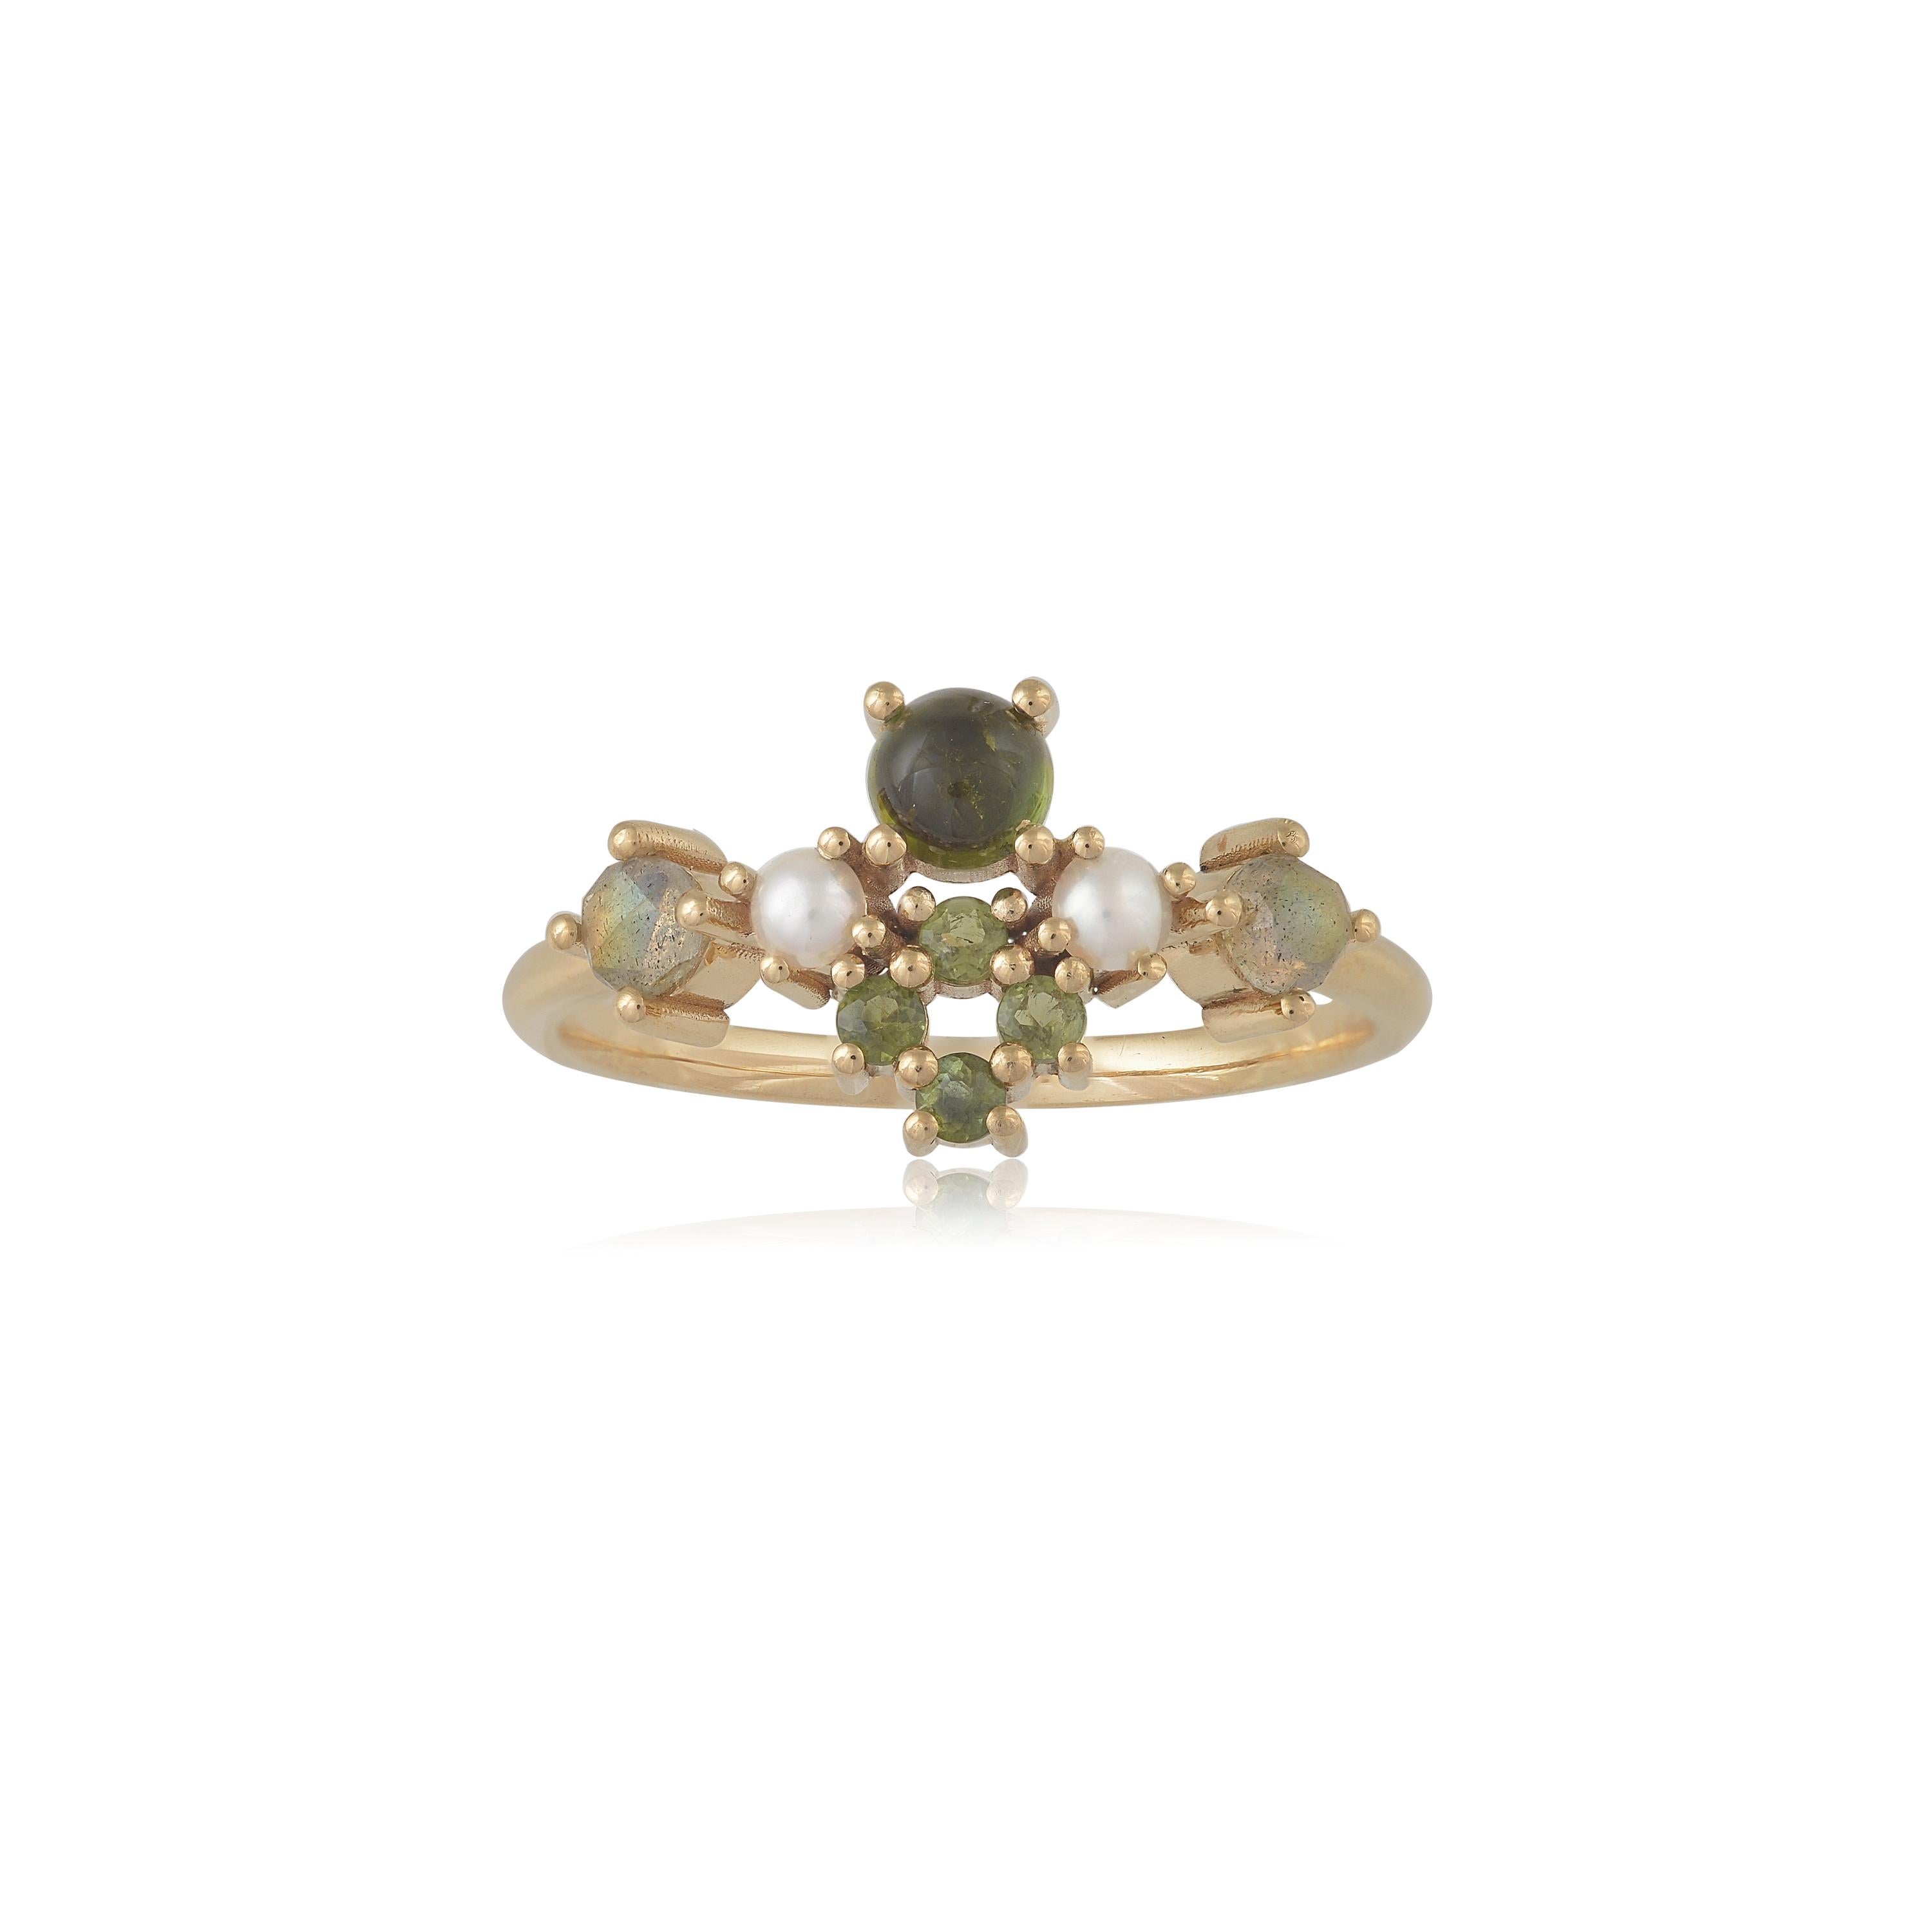 Designer: Alexia Gryllaki
Dimensions: L10x20mm
Ring Size UK P 1/2, US 8
Weight: approximately 3.1g  
Barcode: OFS012

Multi-stone ring in 18 karat yellow gold with round faceted and cabochon green tourmalines approx. 0.45cts, round faceted